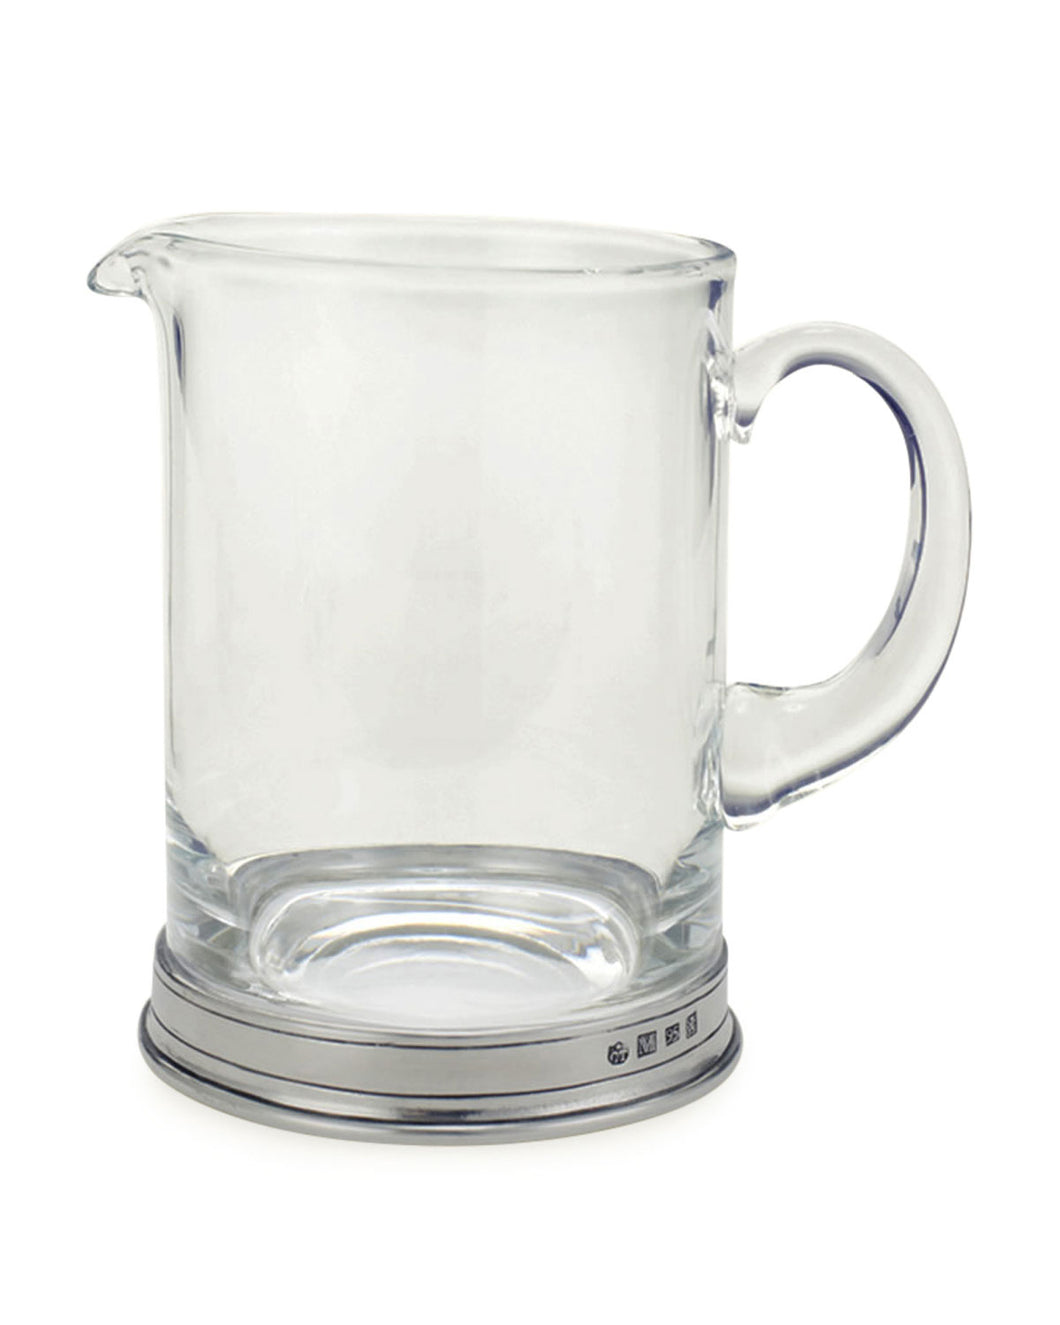 A classic combination of antique finish pewter and sparkling glass the Bar Branch Pitcher from Match makes a great addition to any bar or table.